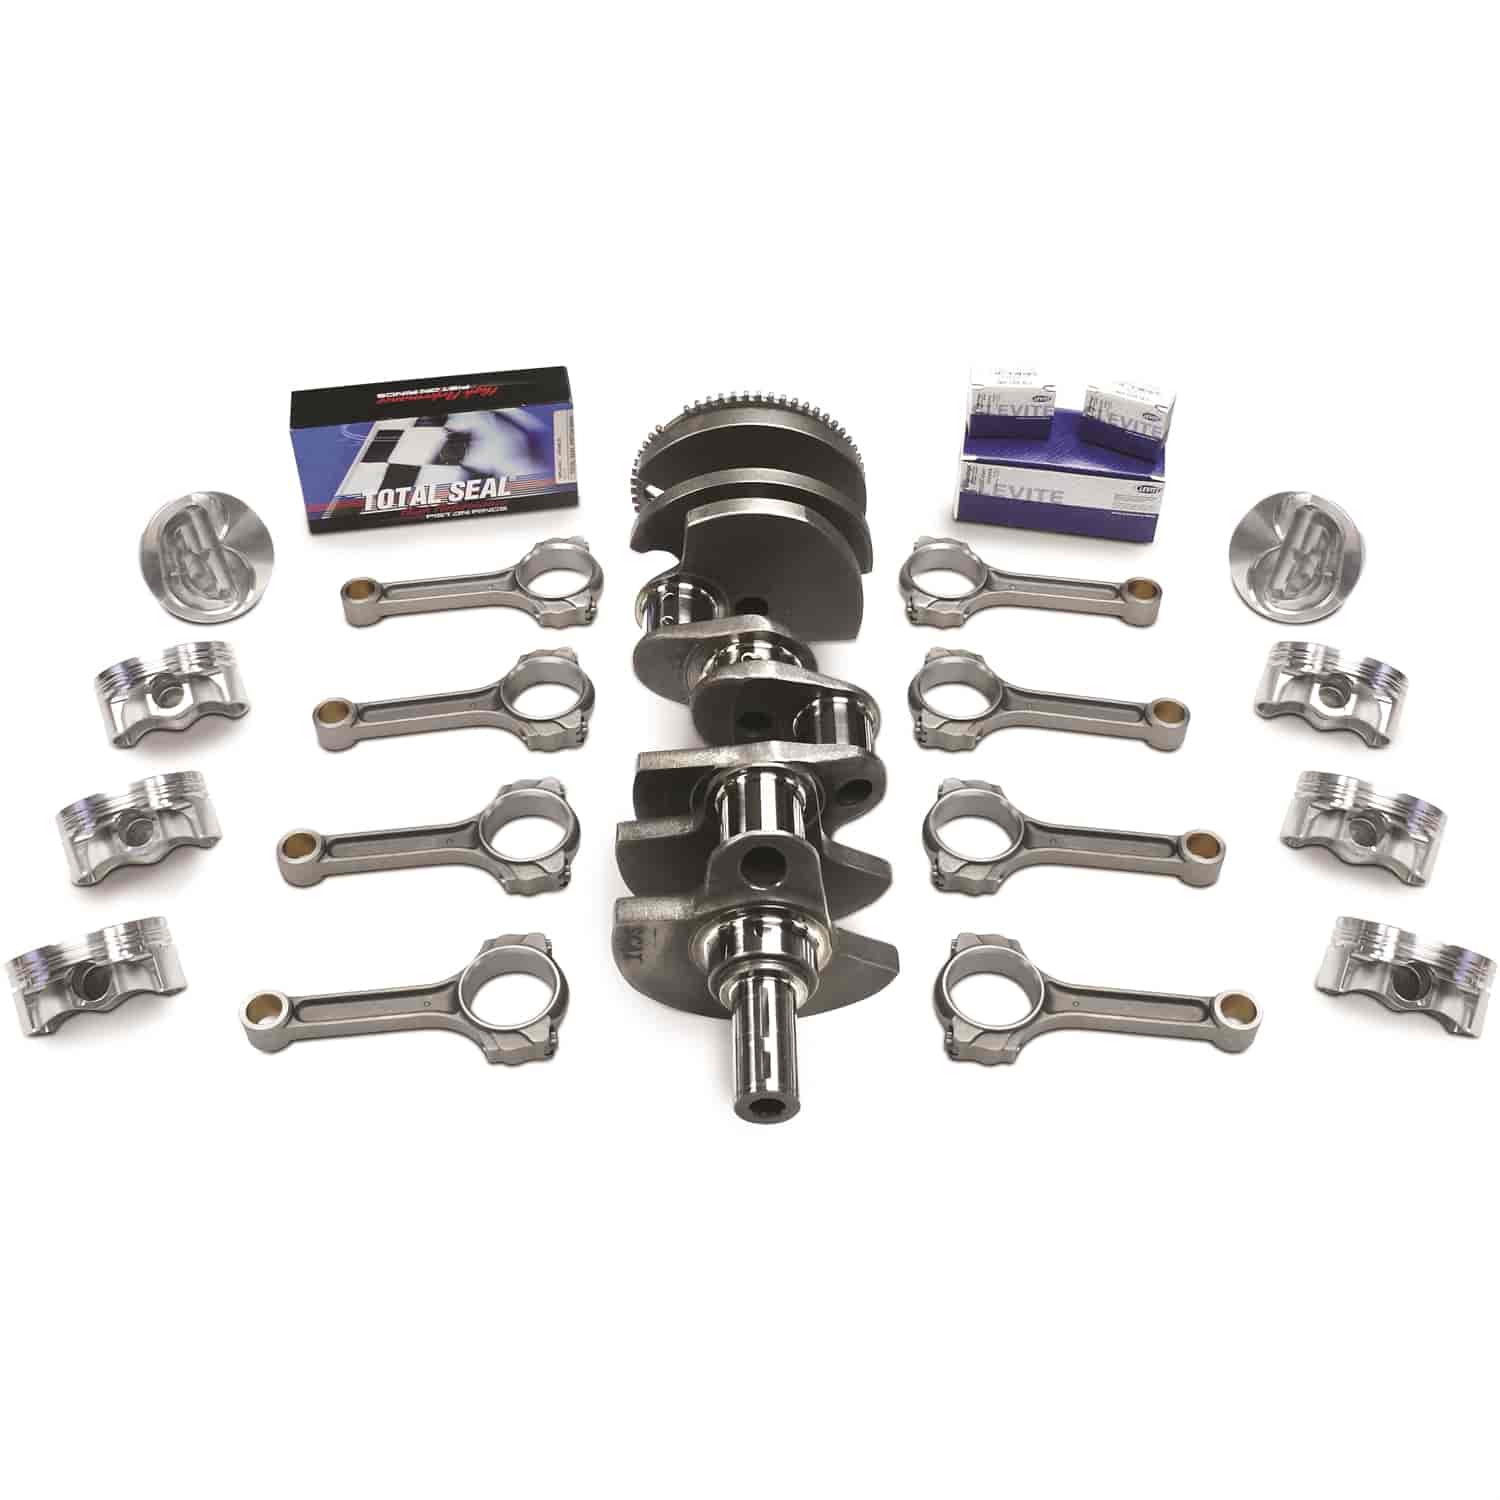 Competition Rotating Assembly Kit [GM LS Series 403 ci]